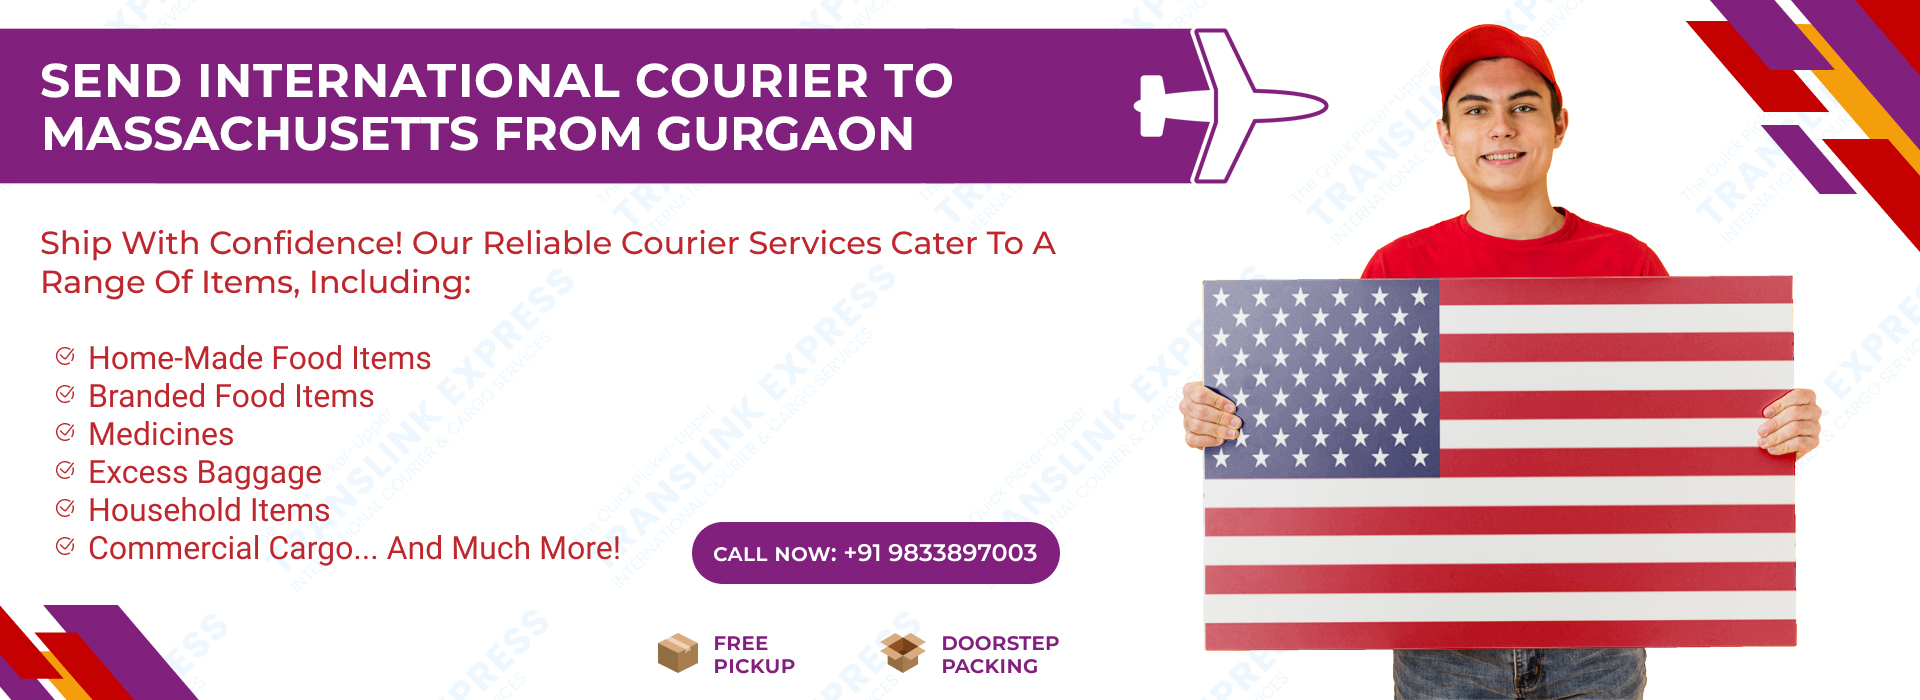 Courier to Massachusetts From Gurgaon